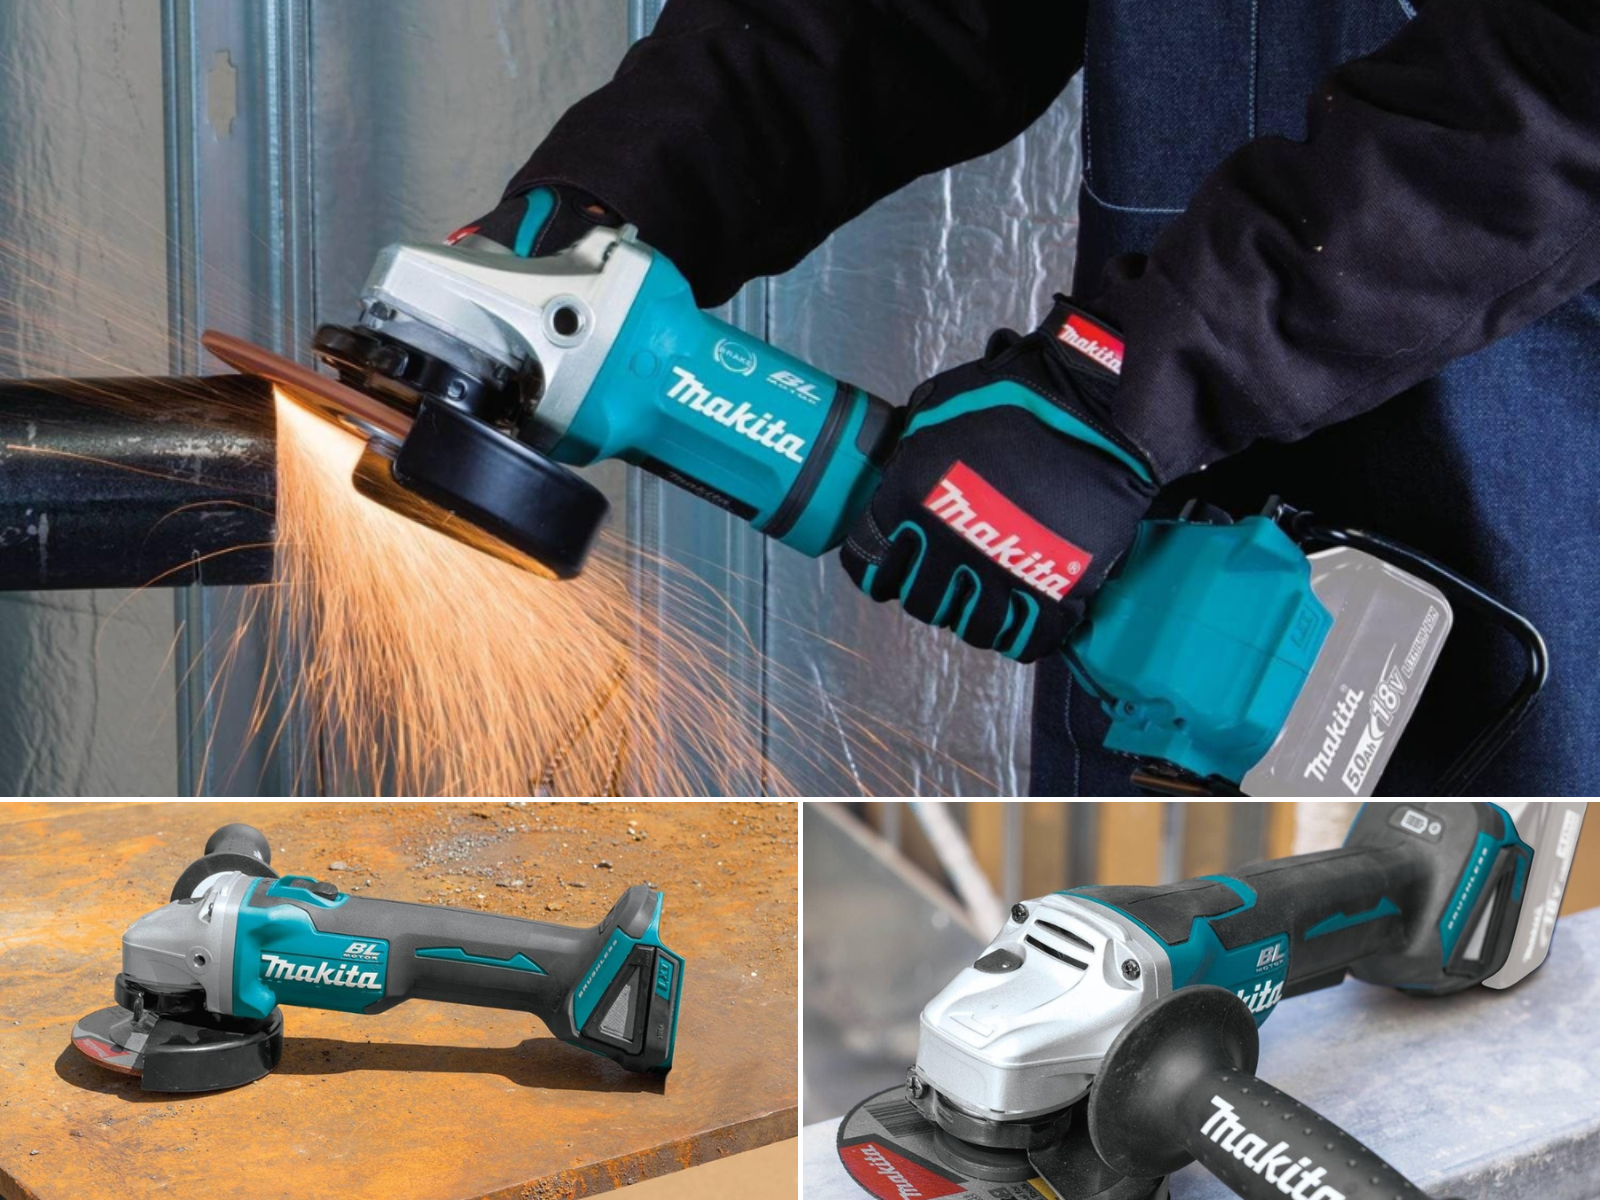 Elevate Your Craftsmanship With The Makita Cordless Grinder